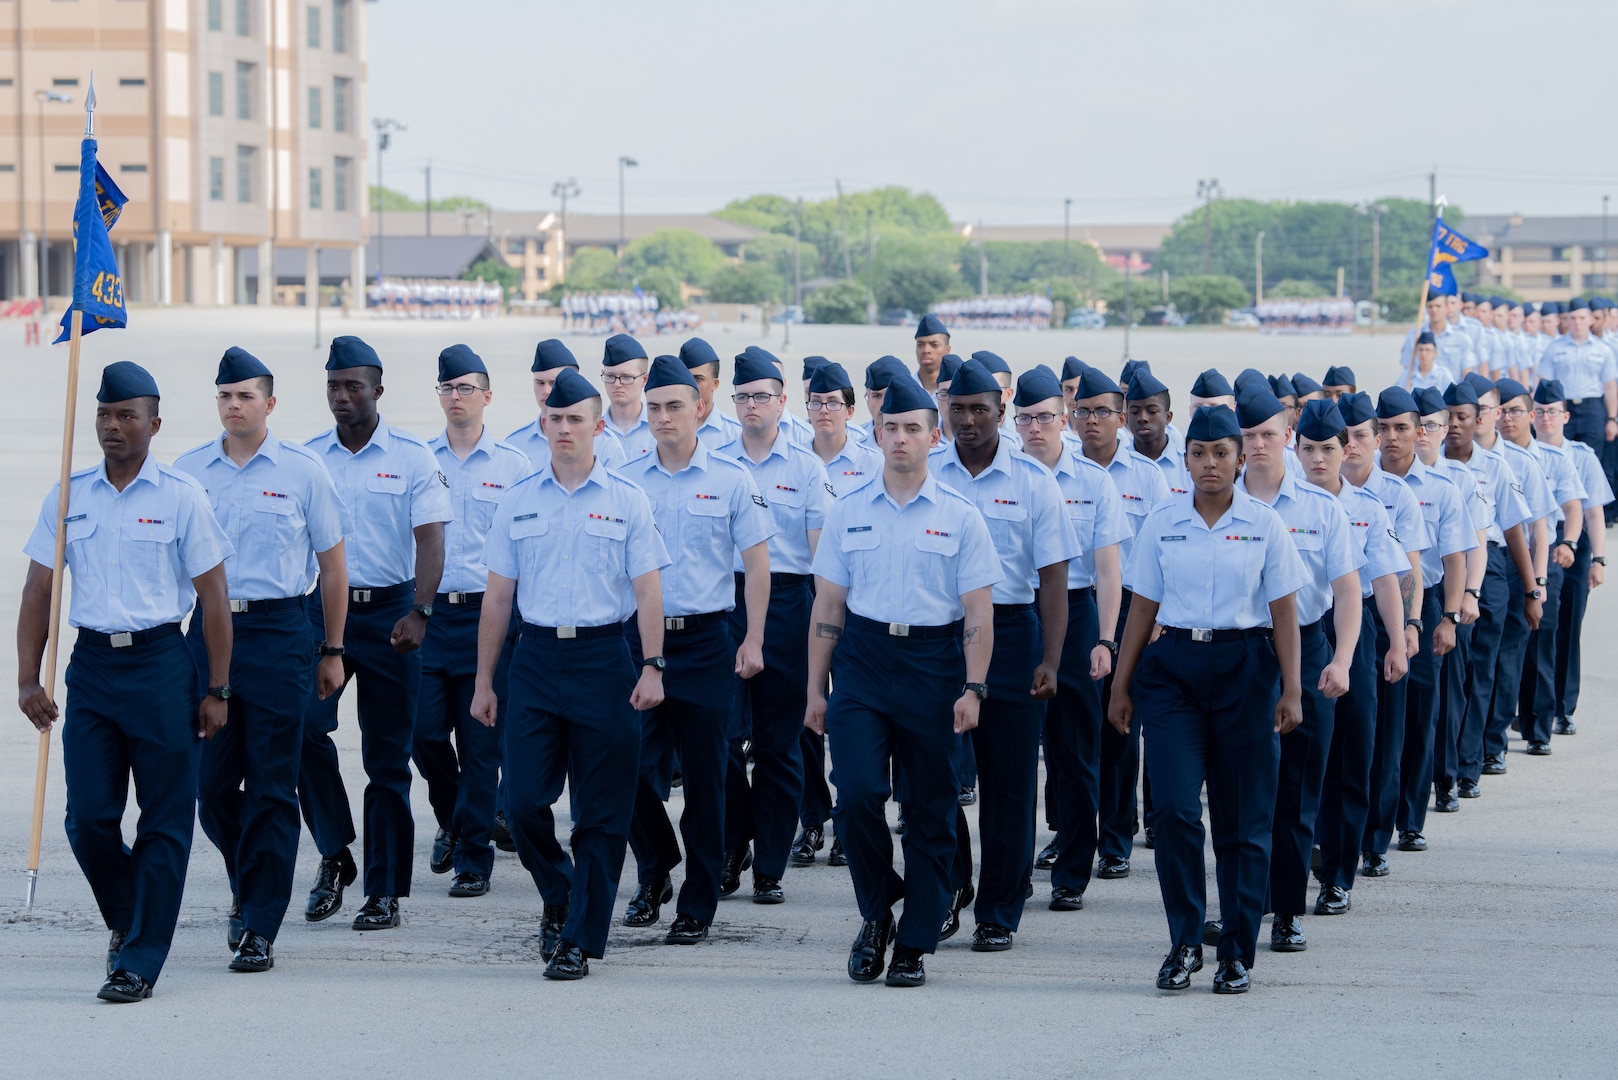 More than 600 Airmen assigned to the 433rd Training Squadron graduated from Basic Military Training at Joint Base San Antonio-Lackland, Texas, June 8-9 2022.